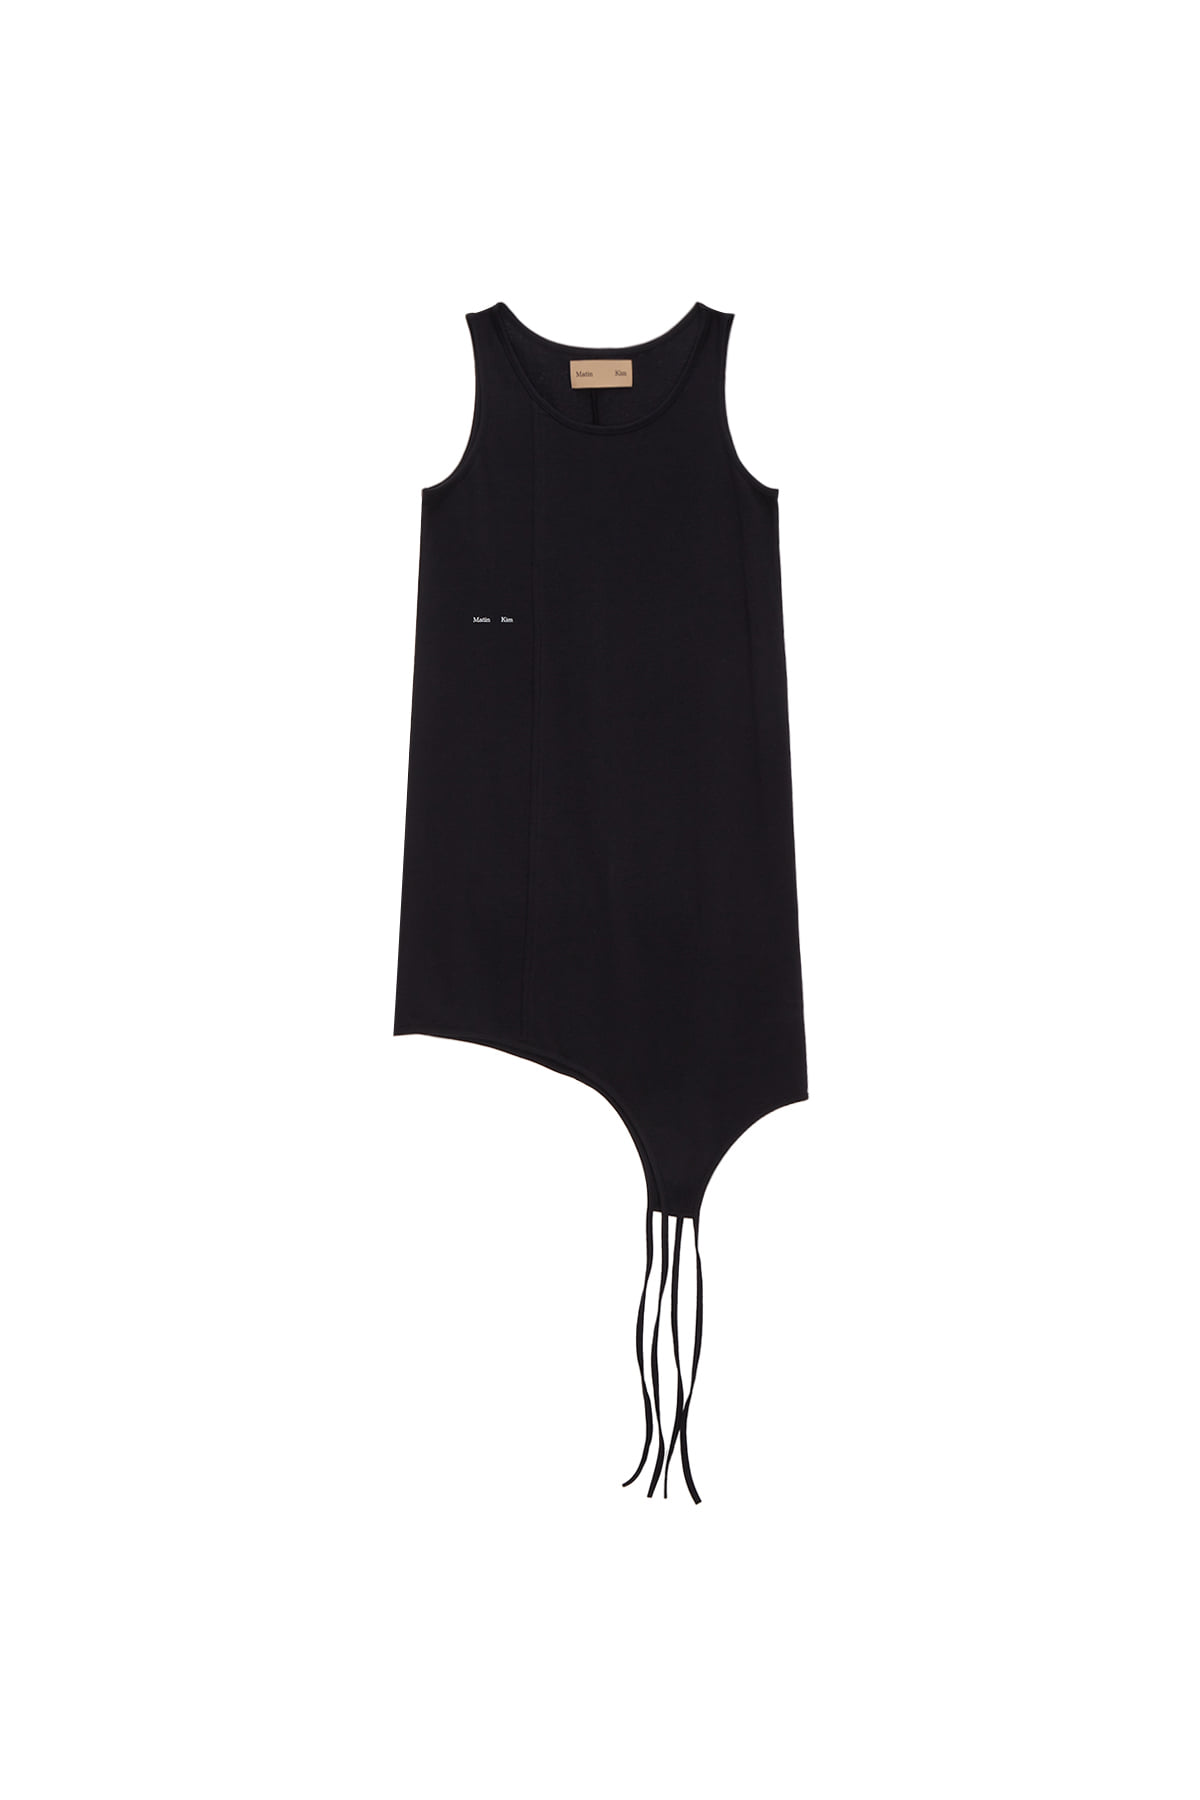 SLEEVELESS TAIL ONE PIECE IN BLACK